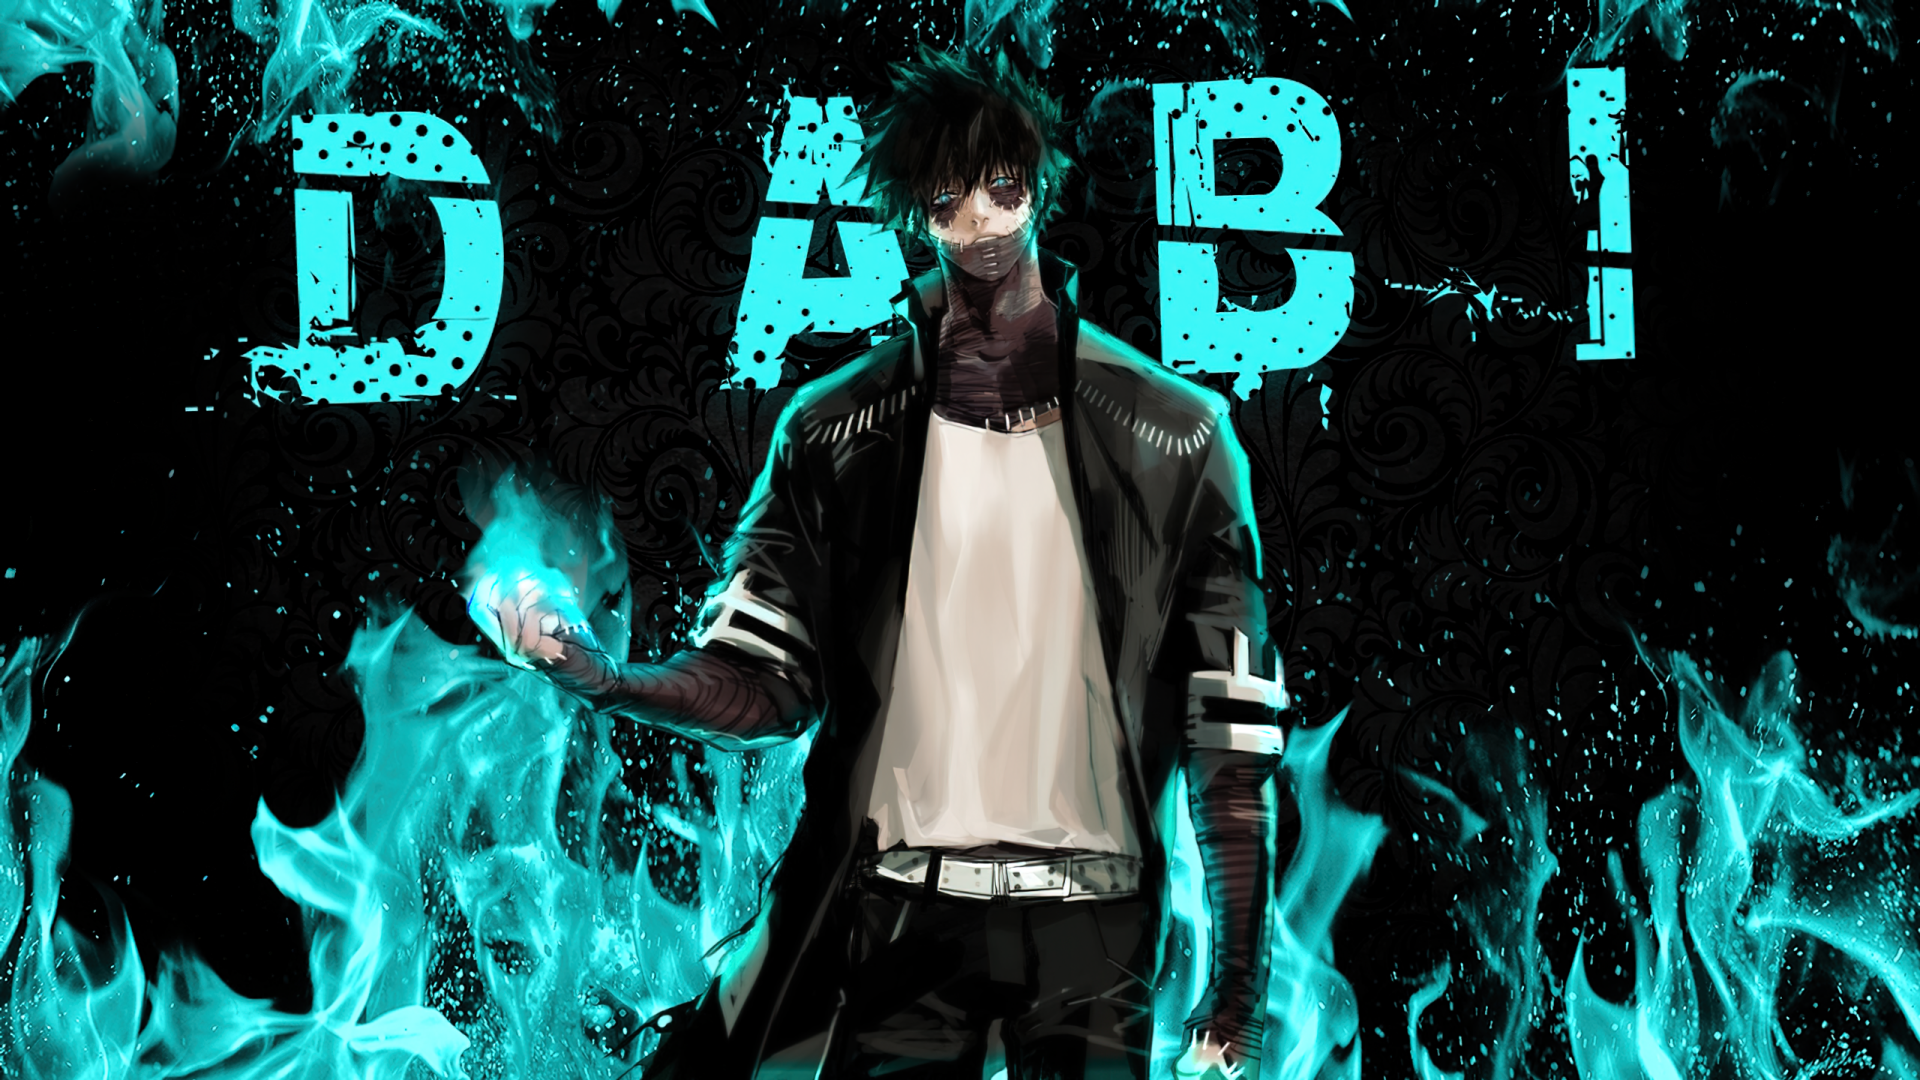 Bad Boy Anime Wallpapers - Wallpaper Cave